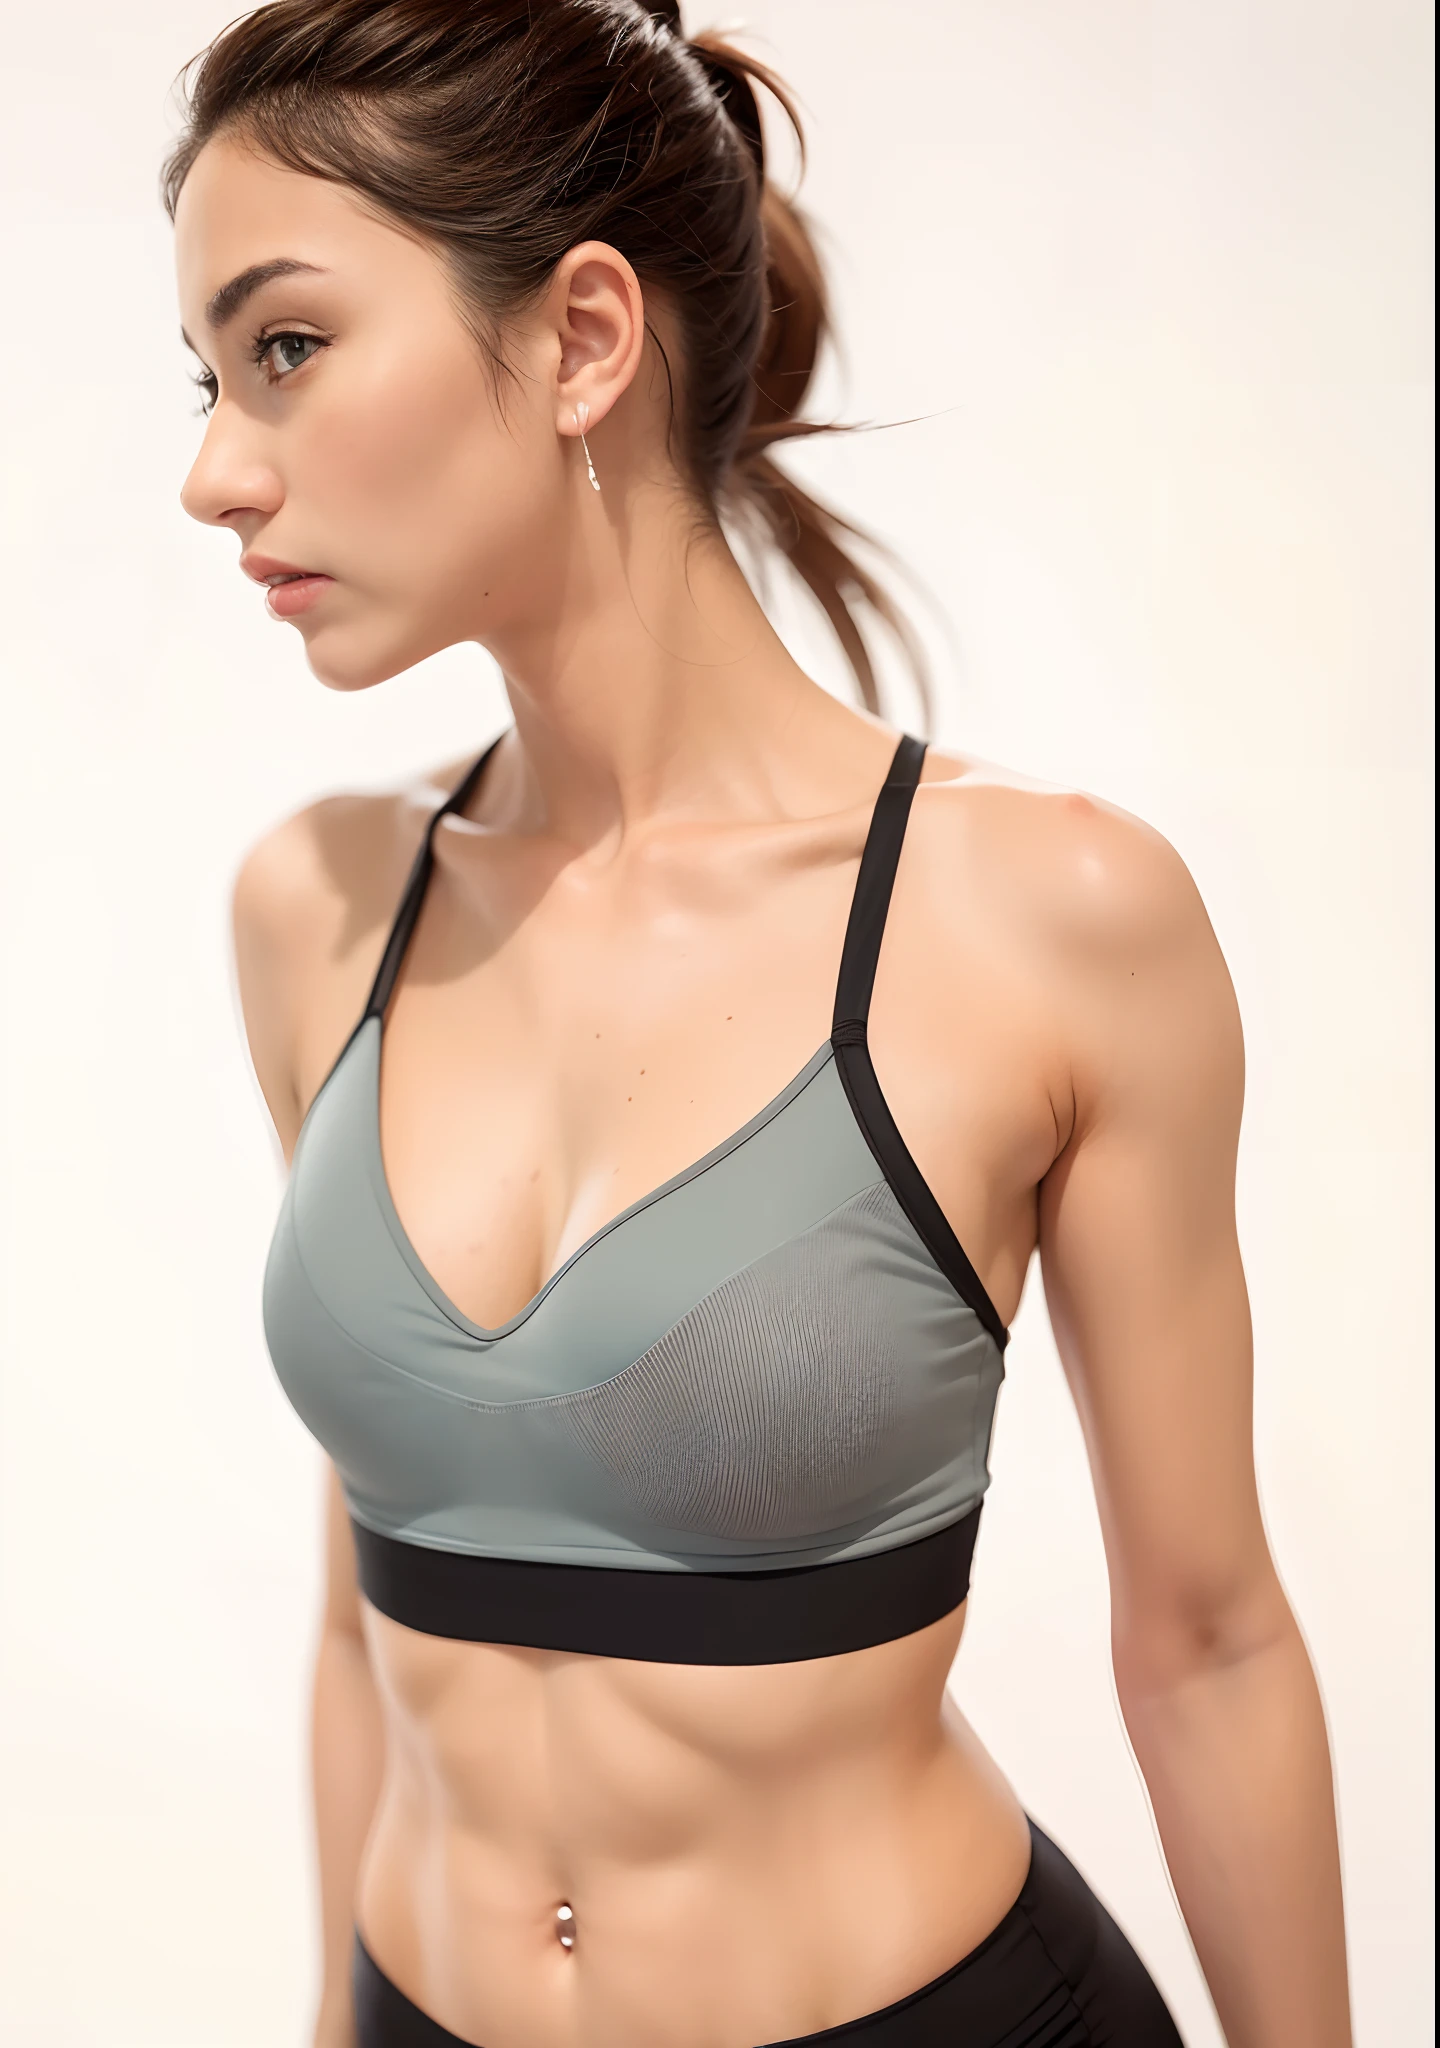 A closeup of a gorgeous woman in a sports bra top and shorts